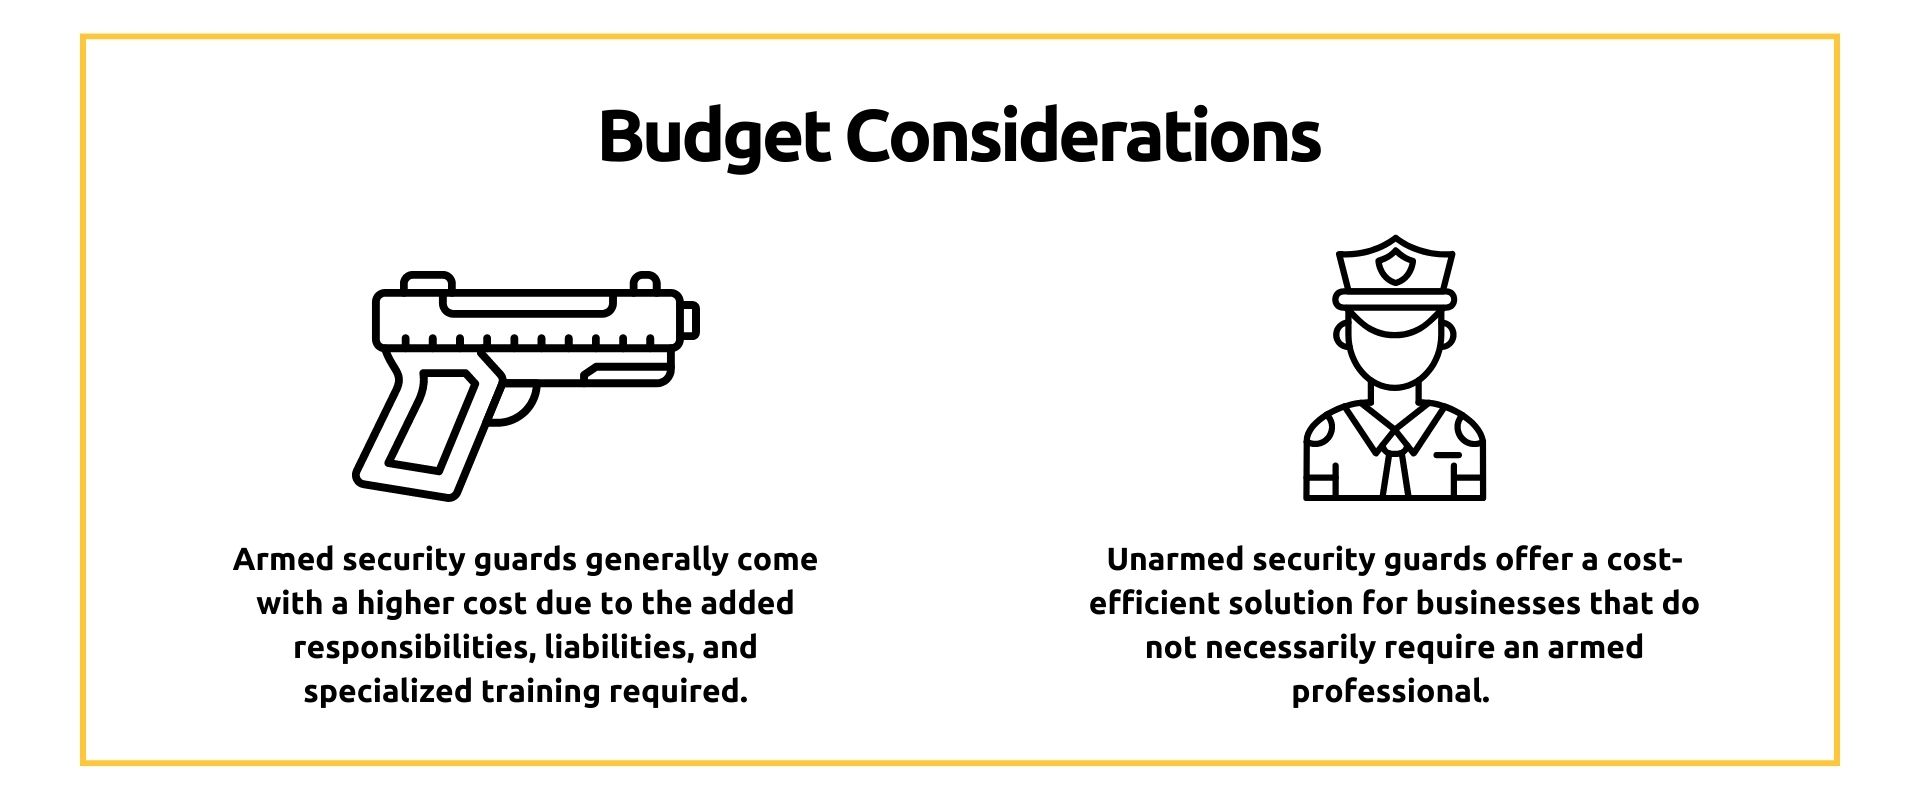 Budget Considerations for Armed security guards